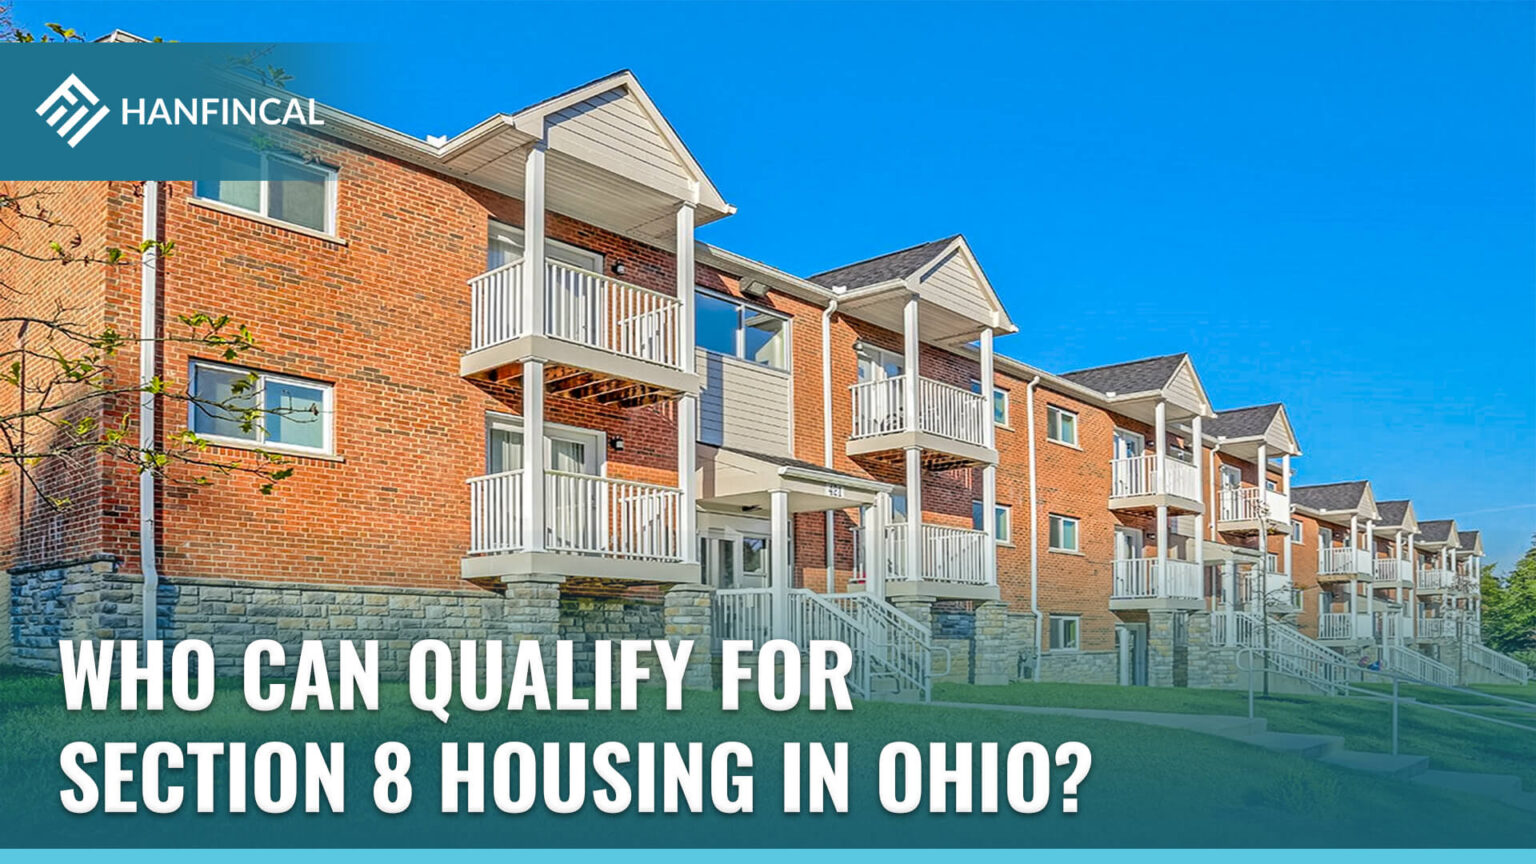 apply-for-section-8-housing-in-ohio-02-2023-hanfincal